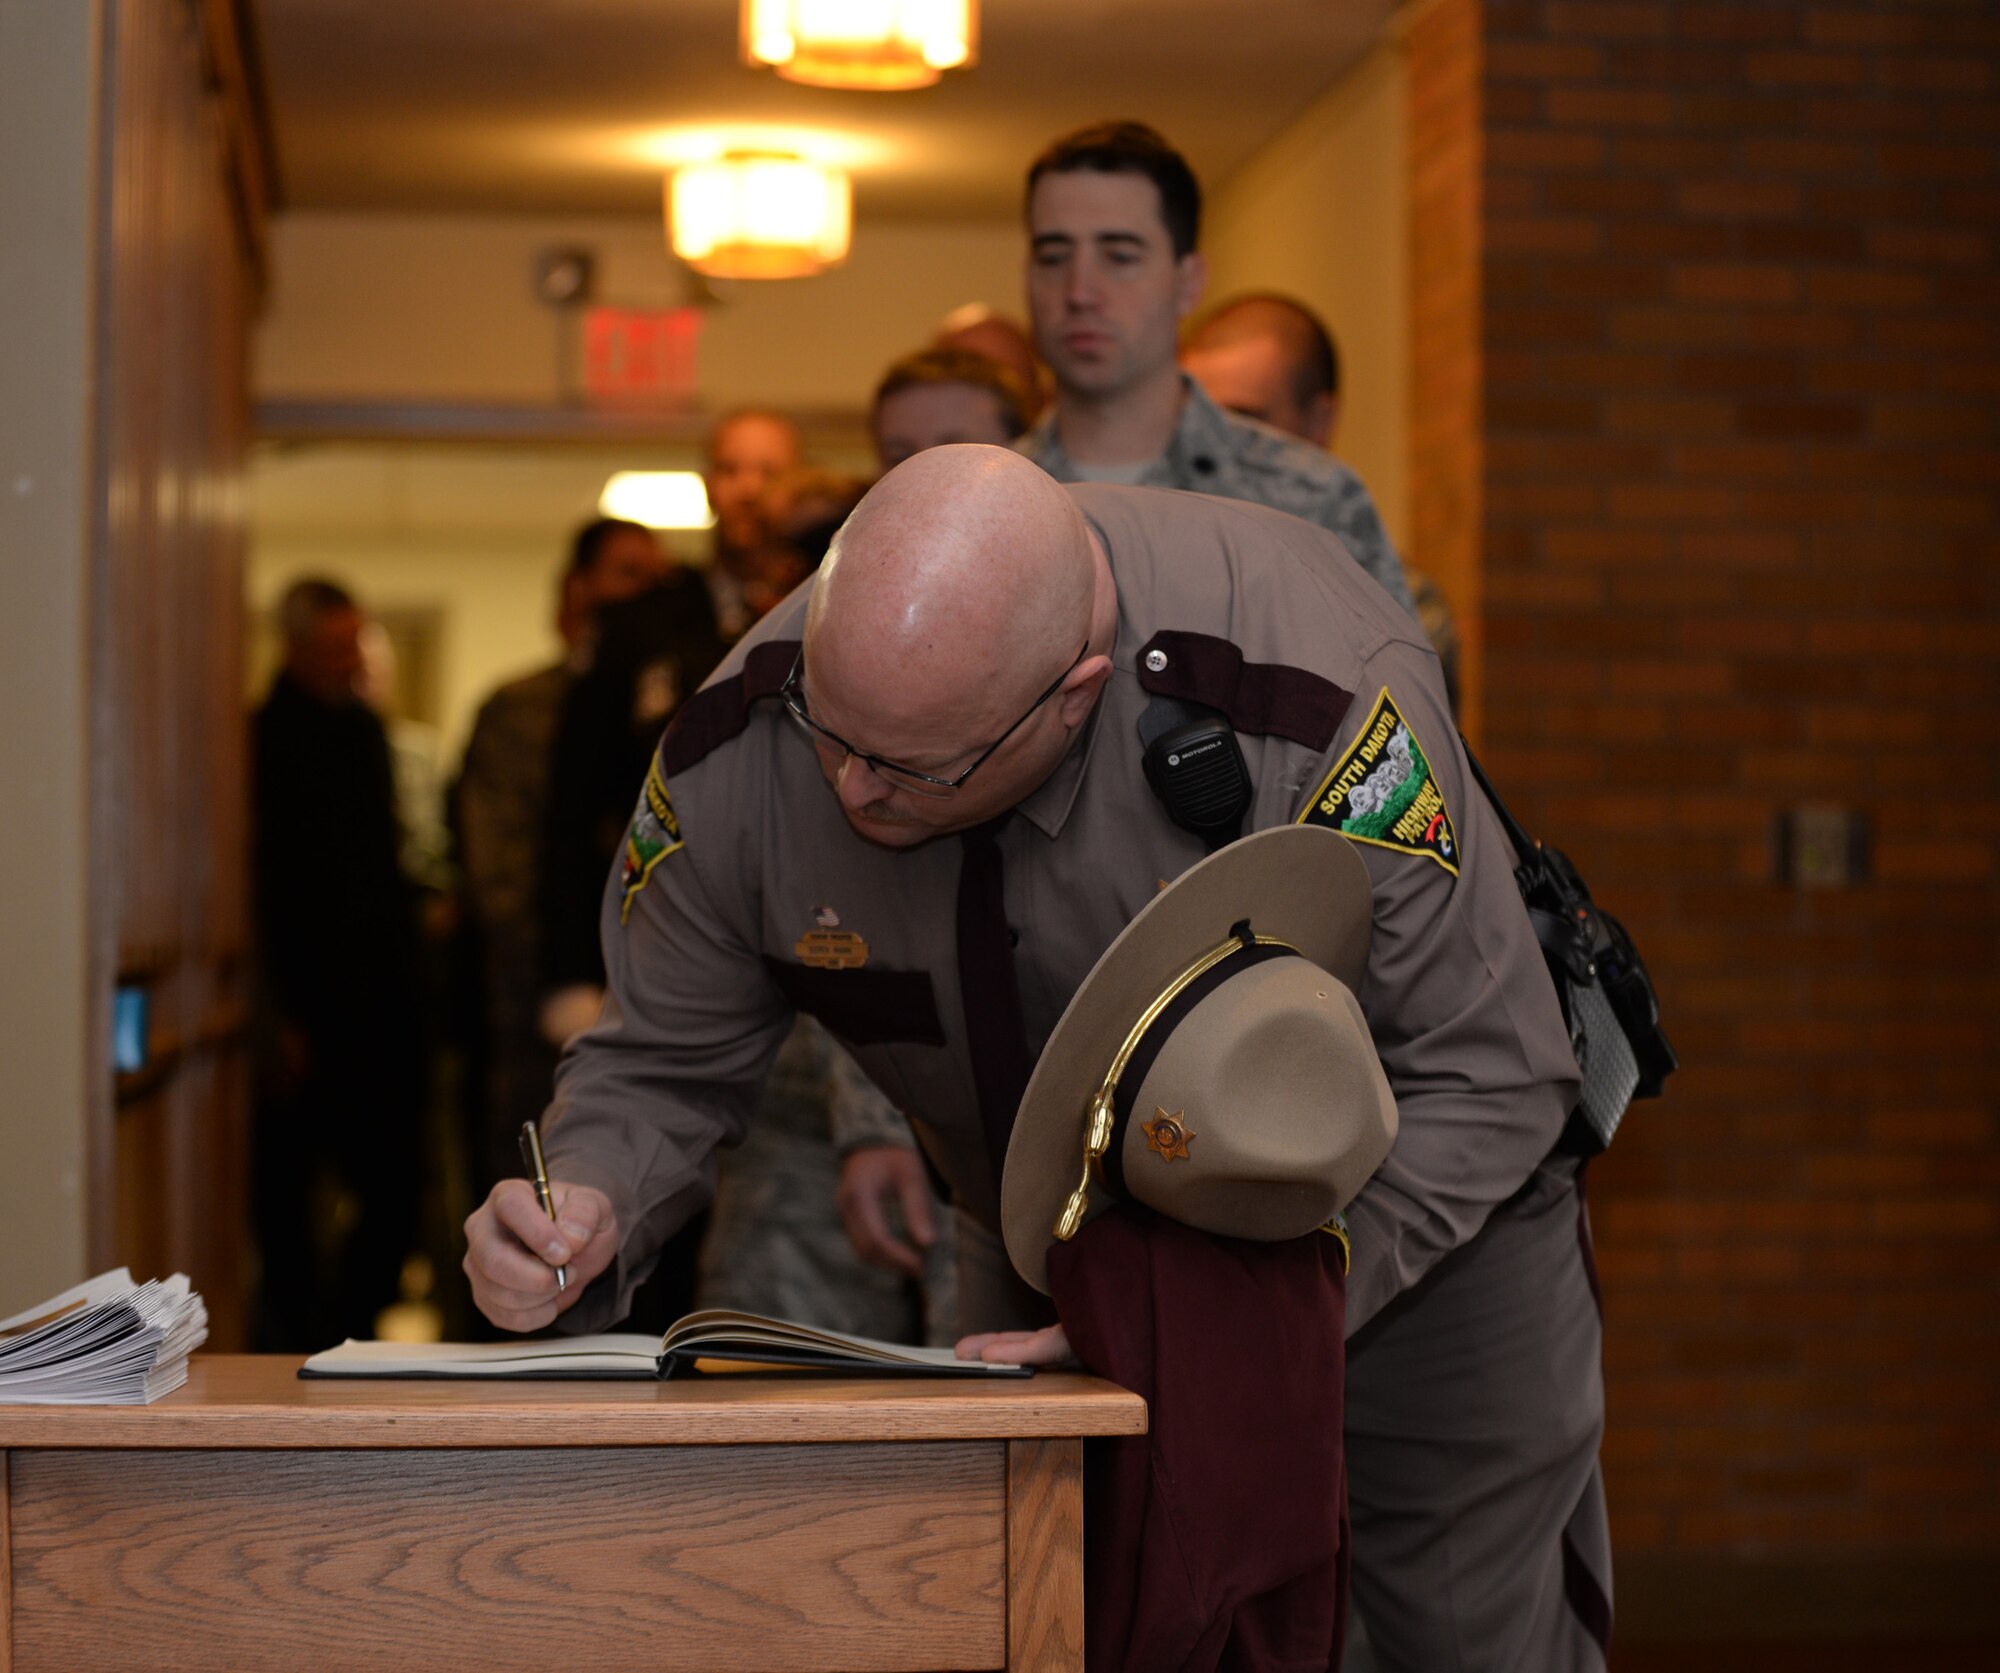 Airmen and members of the Black Hills community sign into the guest book at a memorial service for Special Agent Peter Taub, Air Force Office of Special Investigations Detachment 816 investigator, at Ellsworth Air Force Base, S.D., Jan. 25, 2016. Taub’s contagious smile and personality impacted many lives in the Black Hills community. (U.S. Air Force photo by Airman 1st Class James L. Miller/Released)